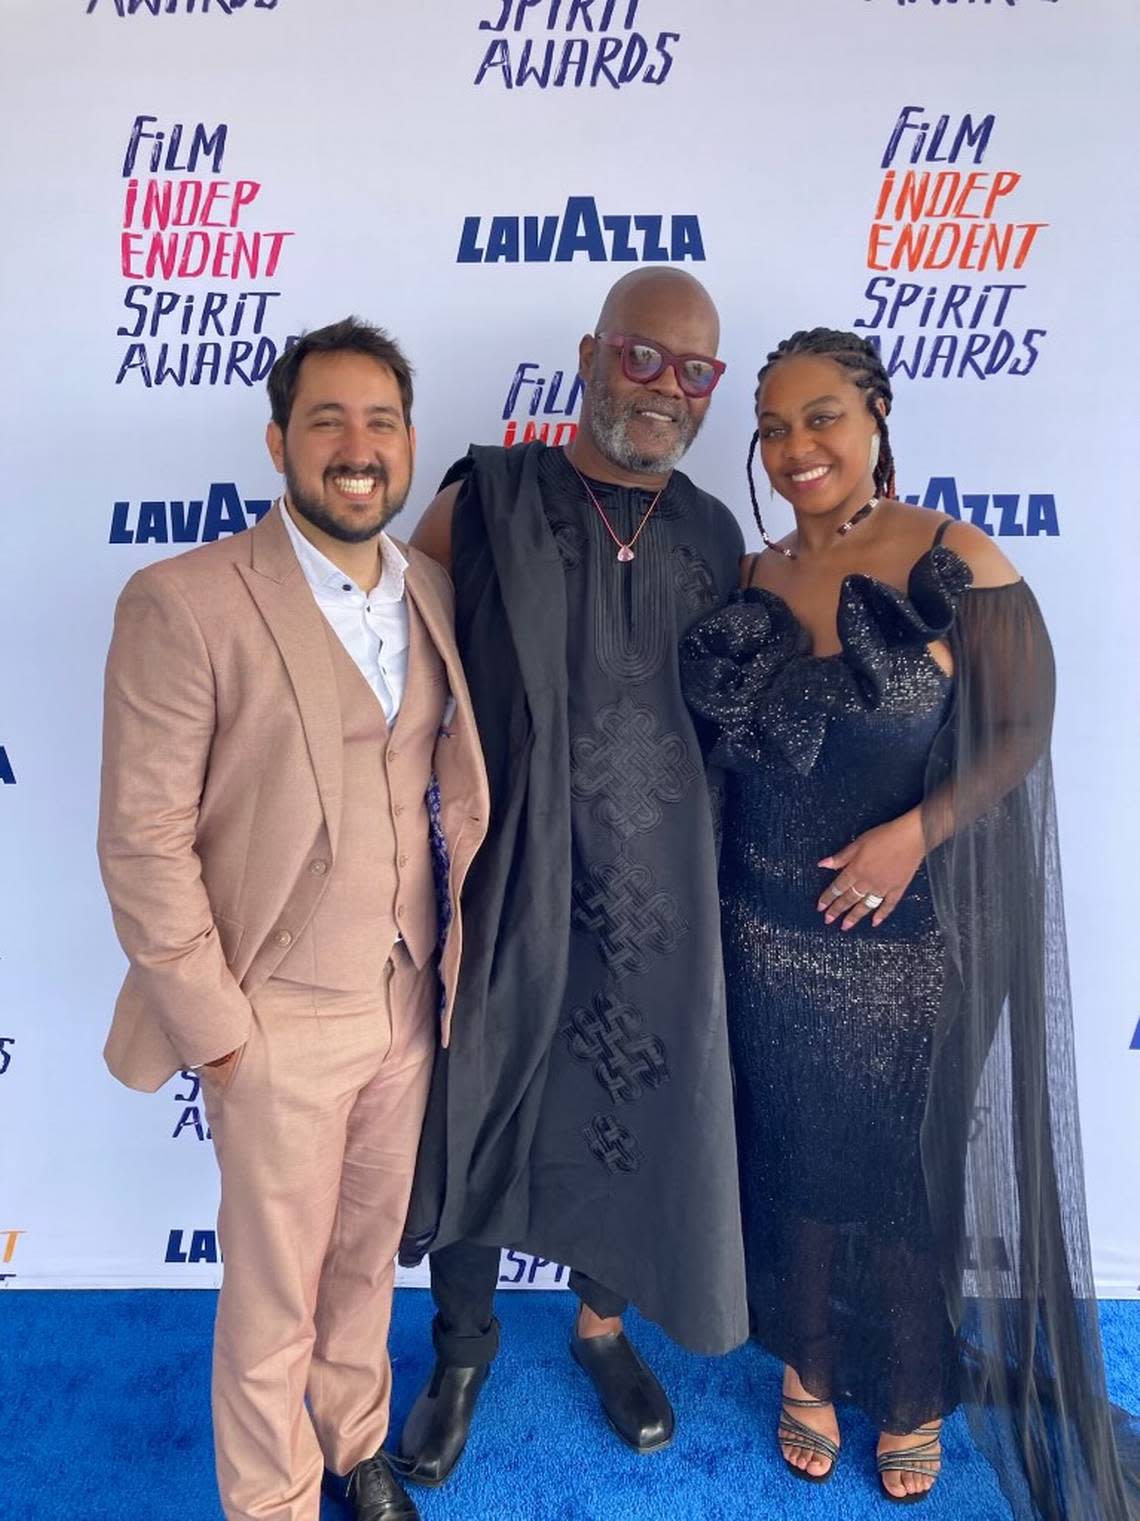 “Mountains,” a Miami-made feature film about gentrification in Little Haiti, was honored at the Film Independent Spirit Awards in February. From left to right, the film’s producer Robert Colom, lead actor Atibon Nazaire and director Monica Sorelle at the event.